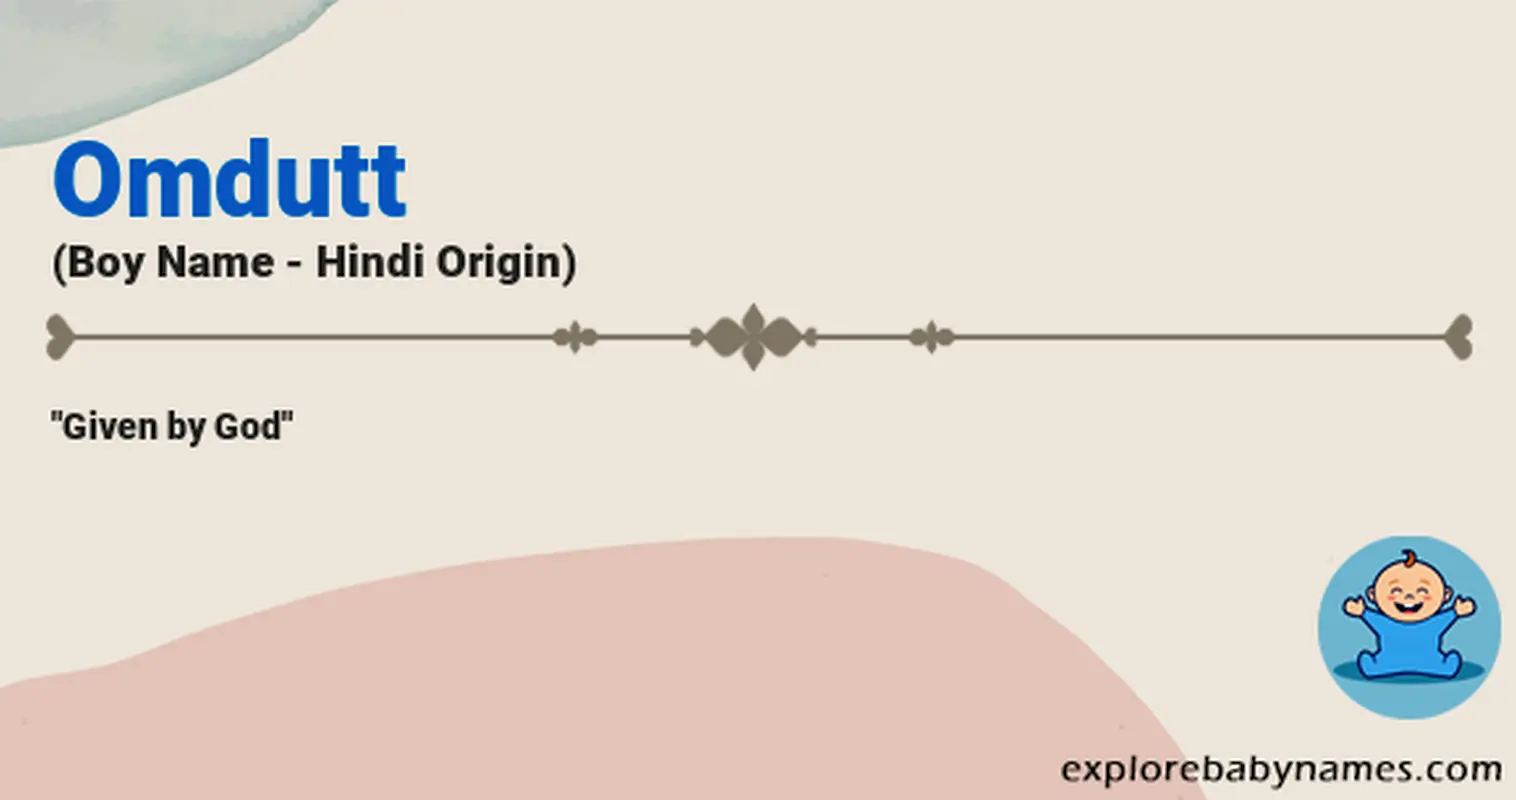 Meaning of Omdutt